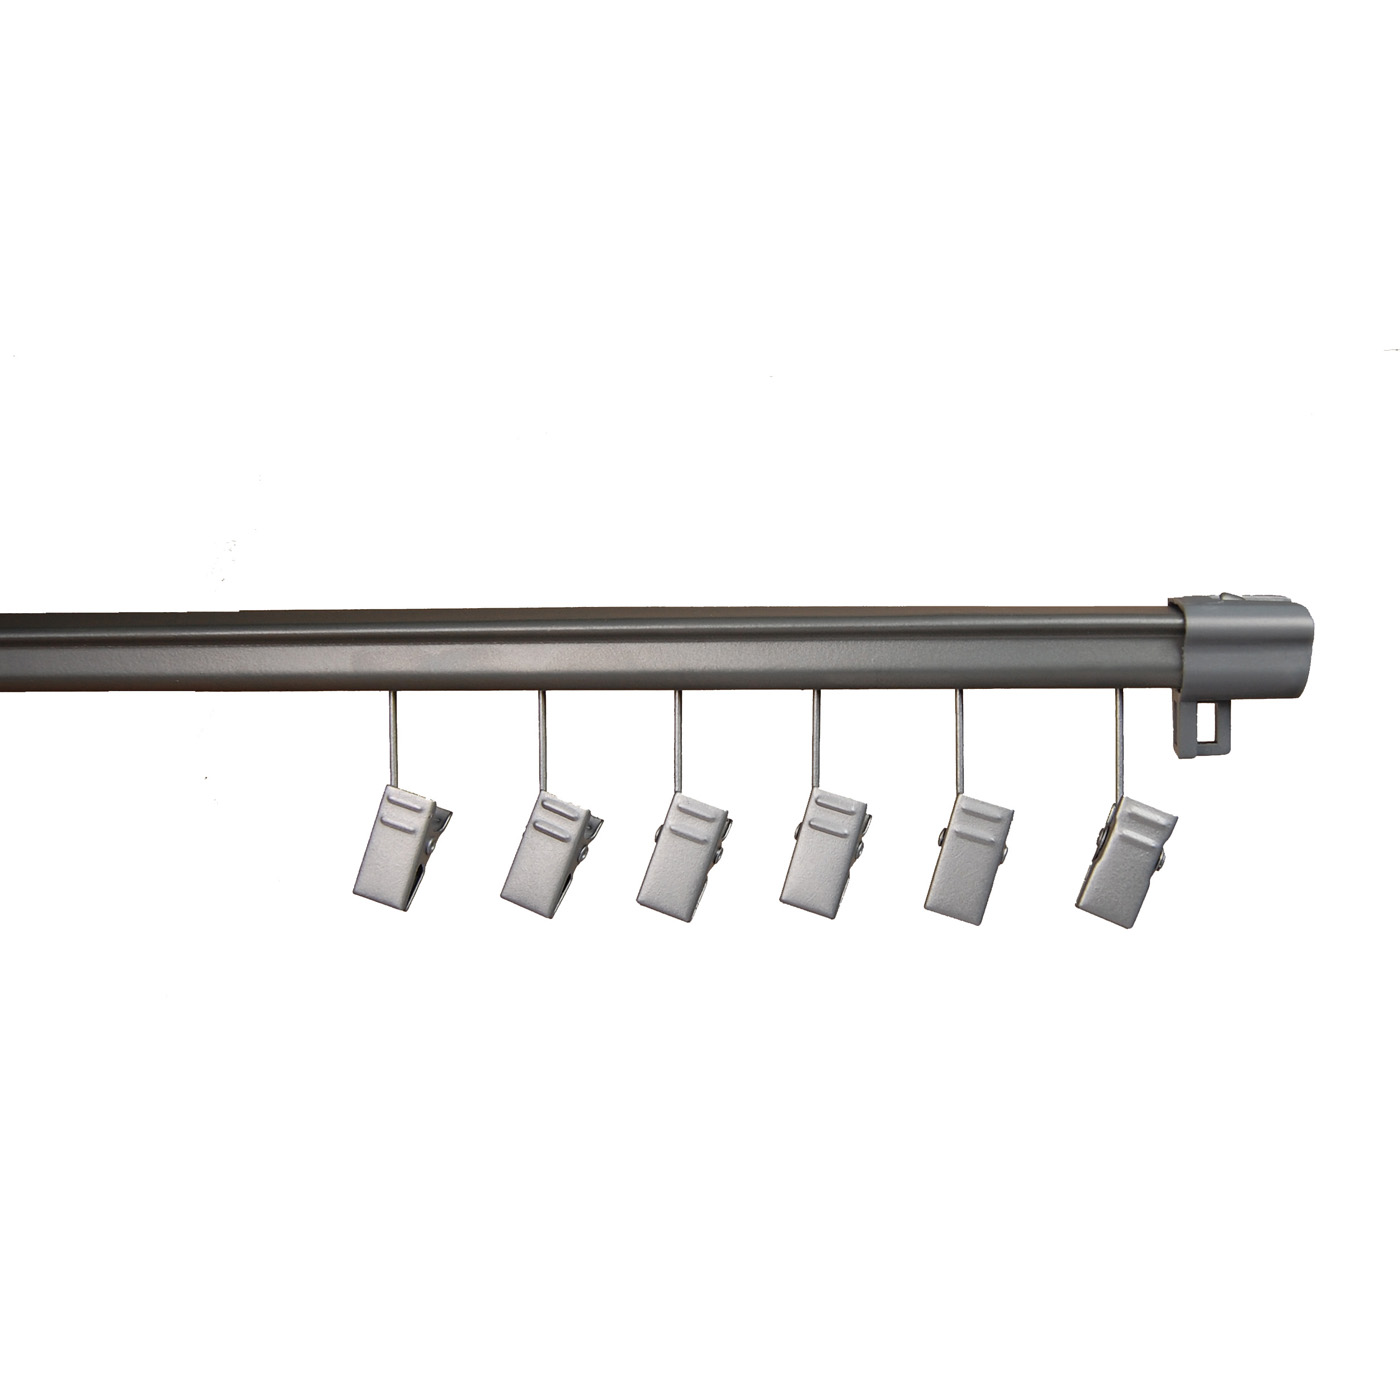 BCL Drapery WAT Adjustable Curtain Track - image 1 of 2